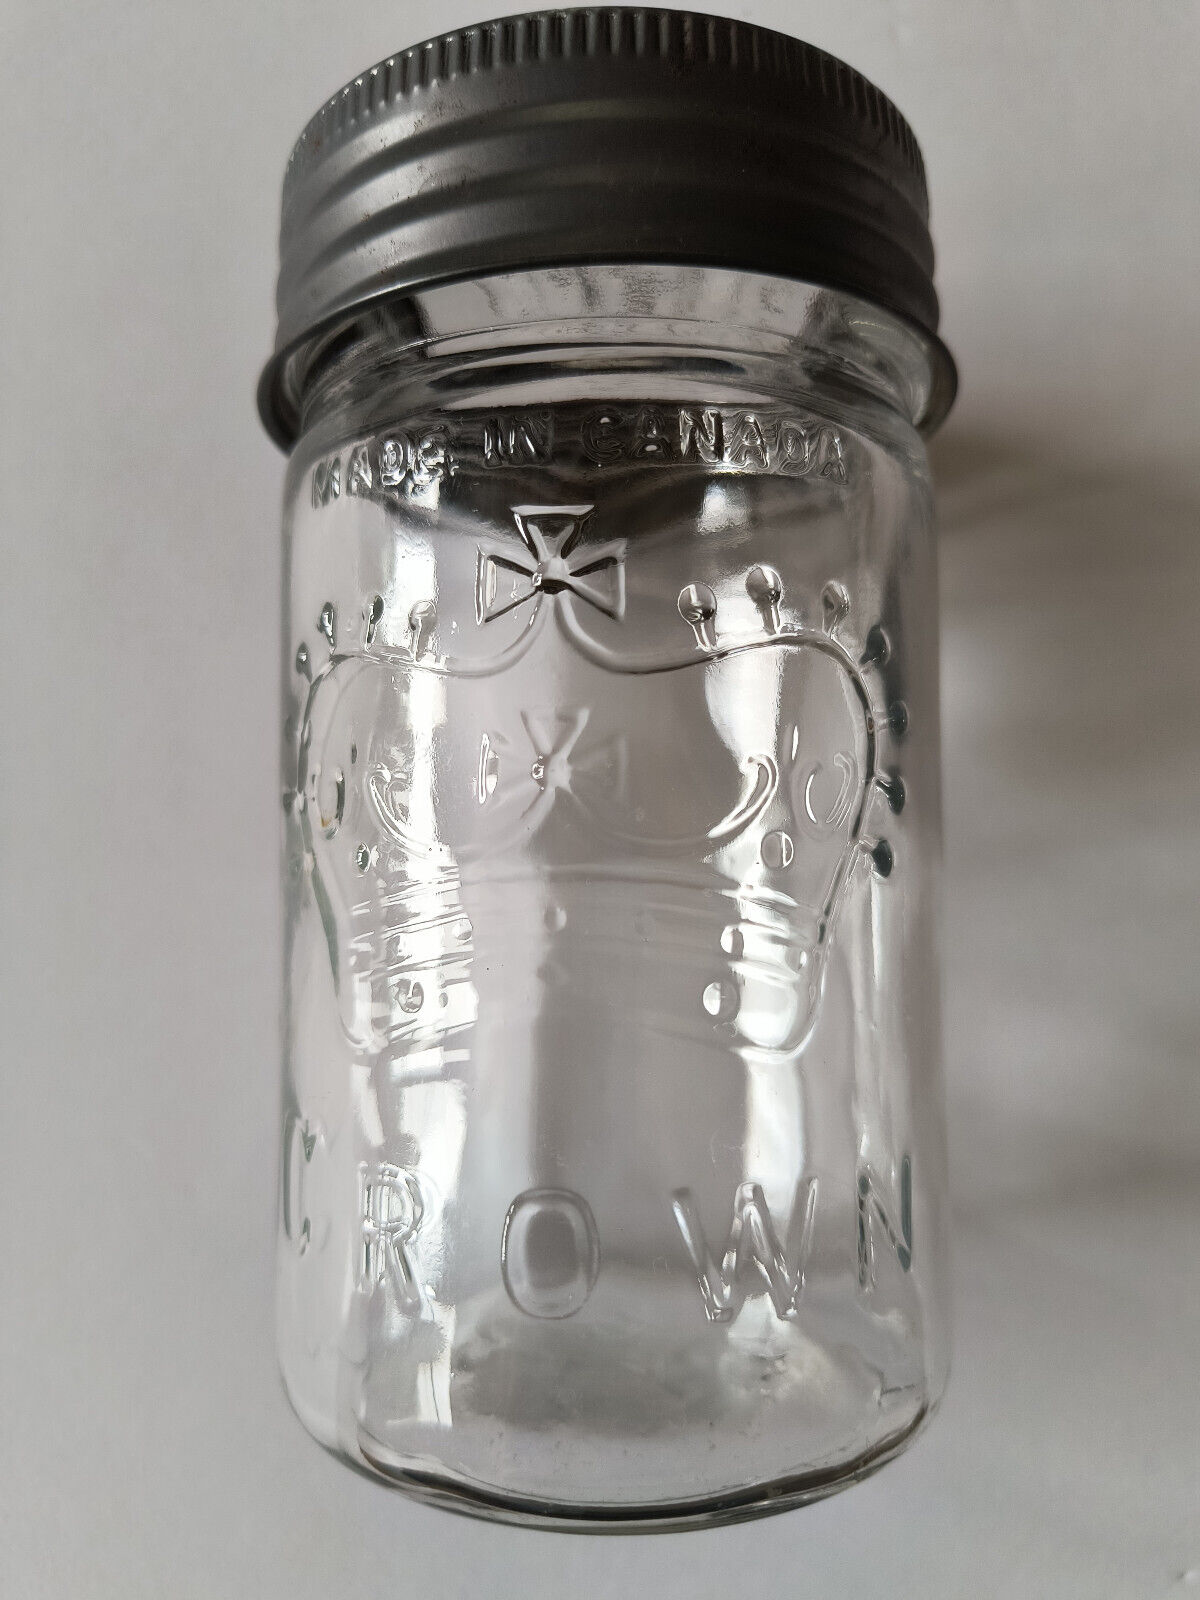 Vintage 1949 Crown Pint Canning Jar w/Glass Lid, Zink Ring, Canada